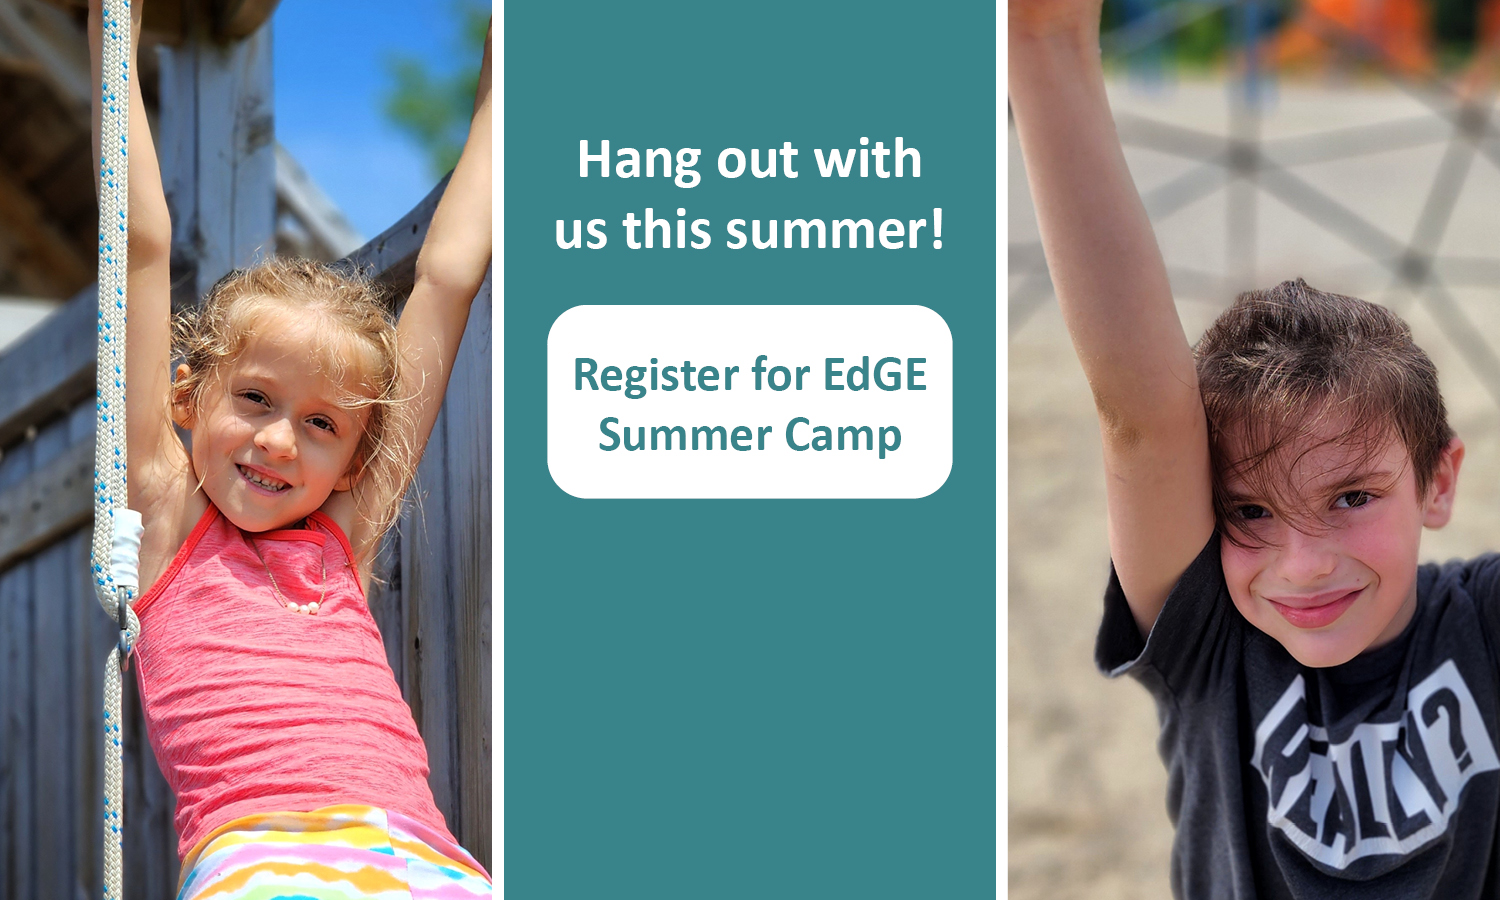 A tryptic with two photos of young girls smiling and hanging off of playground equipment. In the center is a teal banner reading "Hang out with us this summer! Register for EdGE Summer Camp" Click that banner to register for summer camp. 